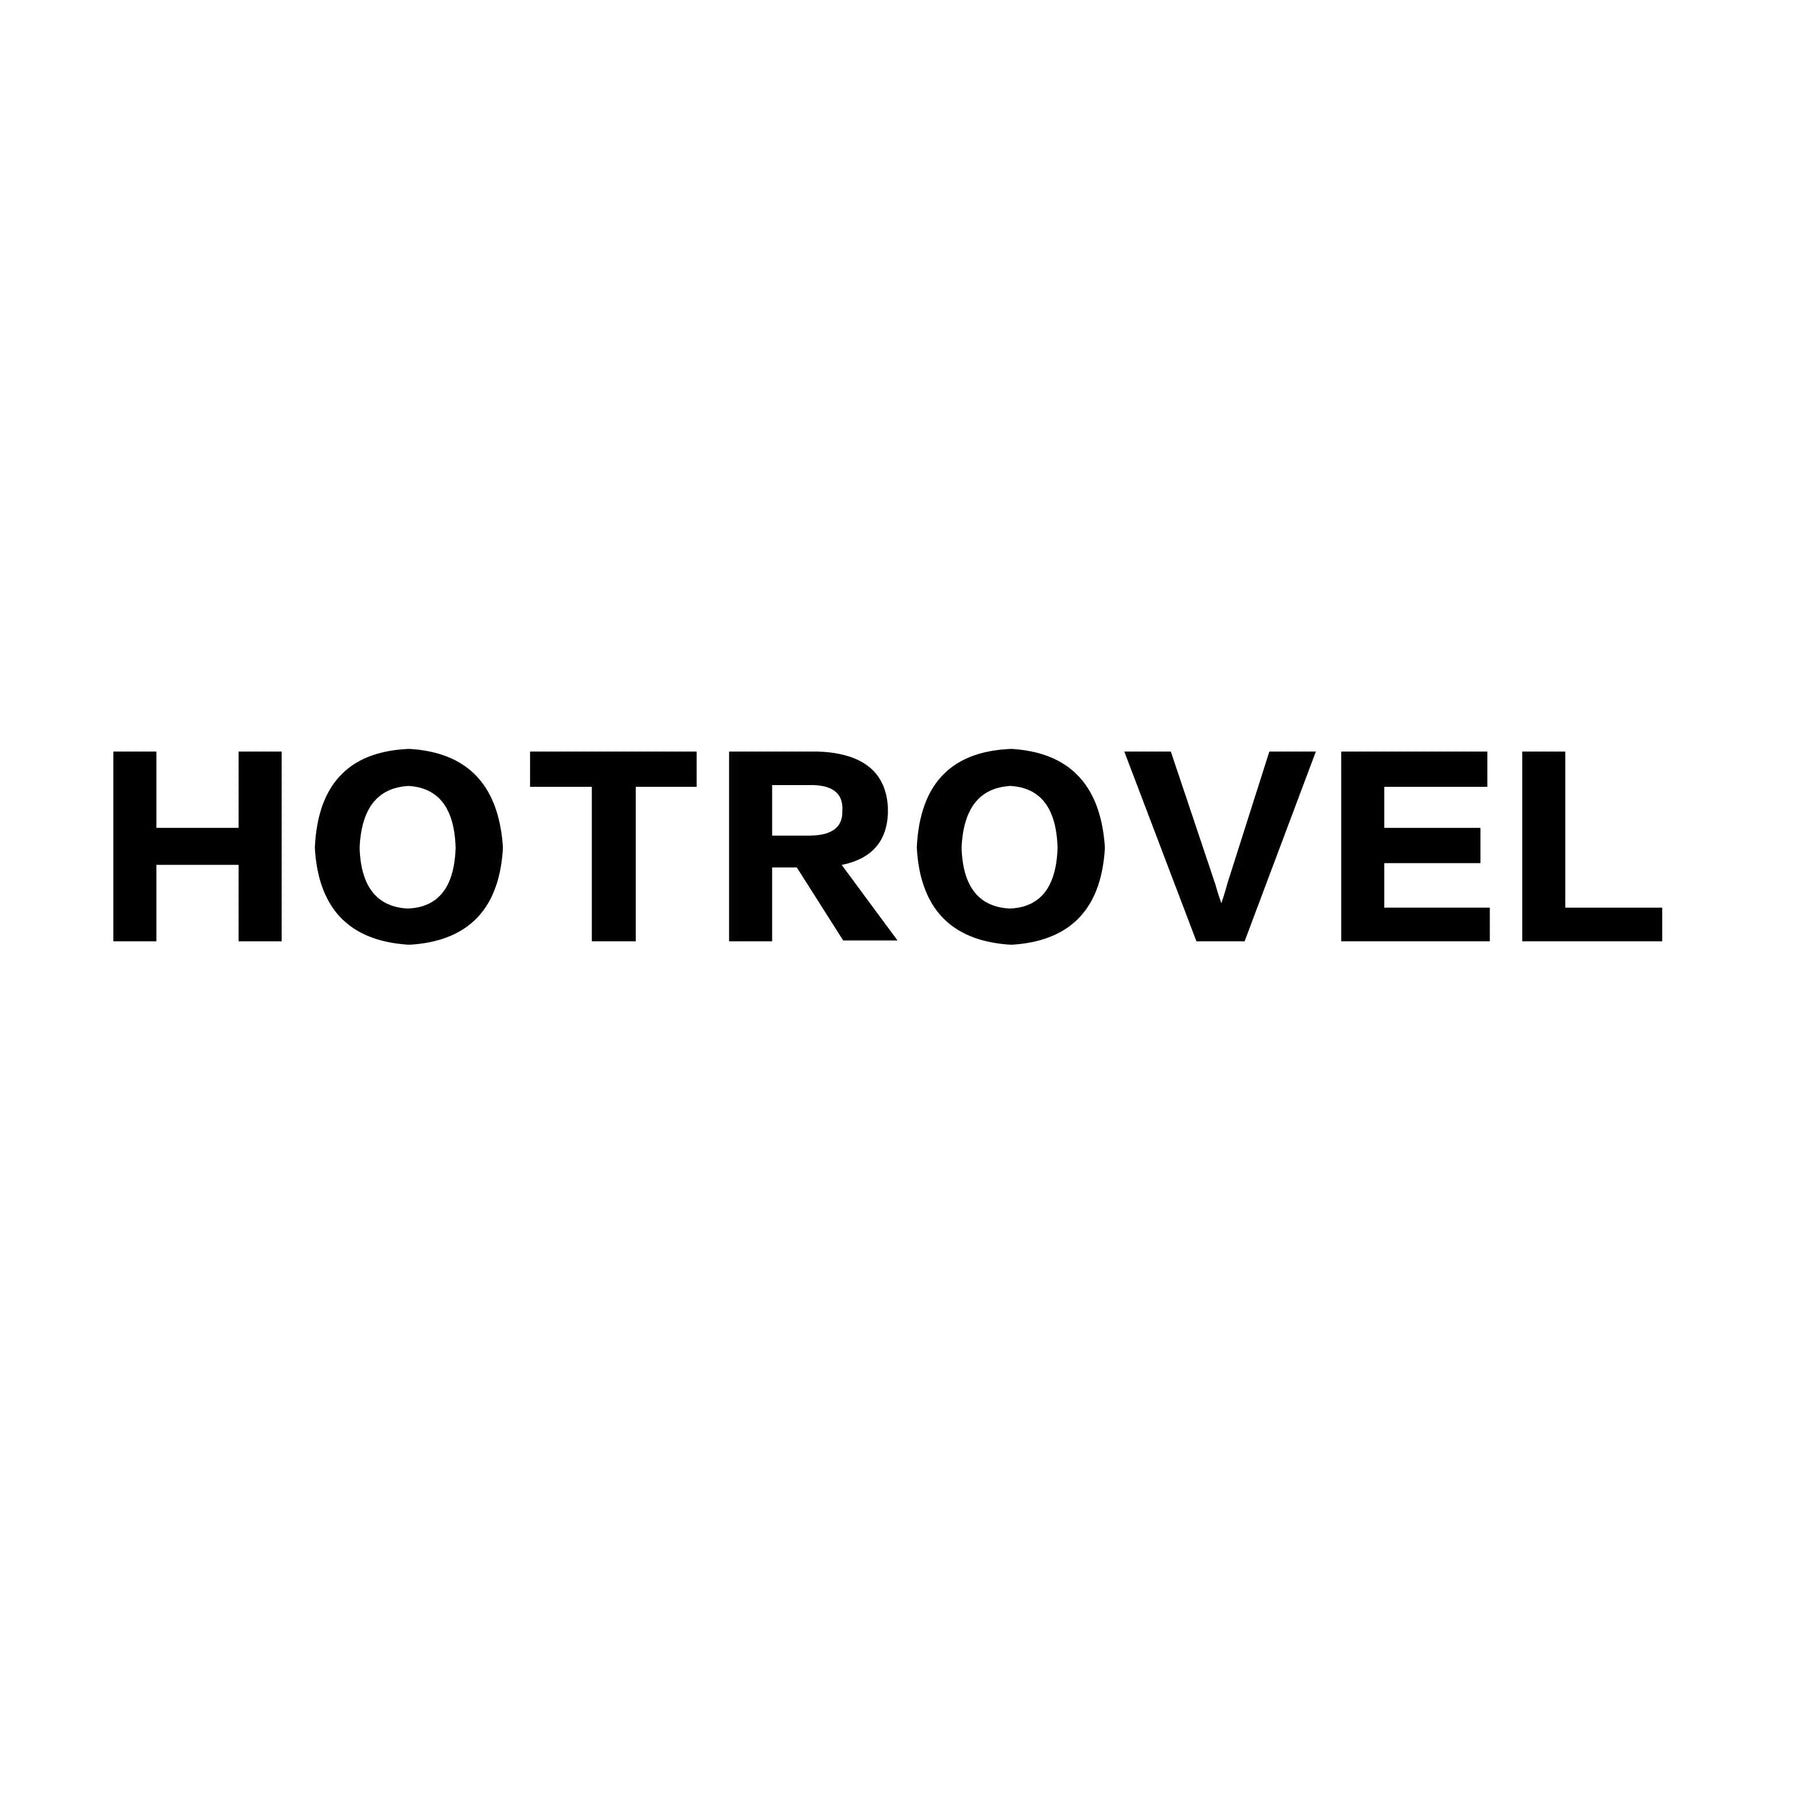 HOTROVEL BRAND INTRODUCTION